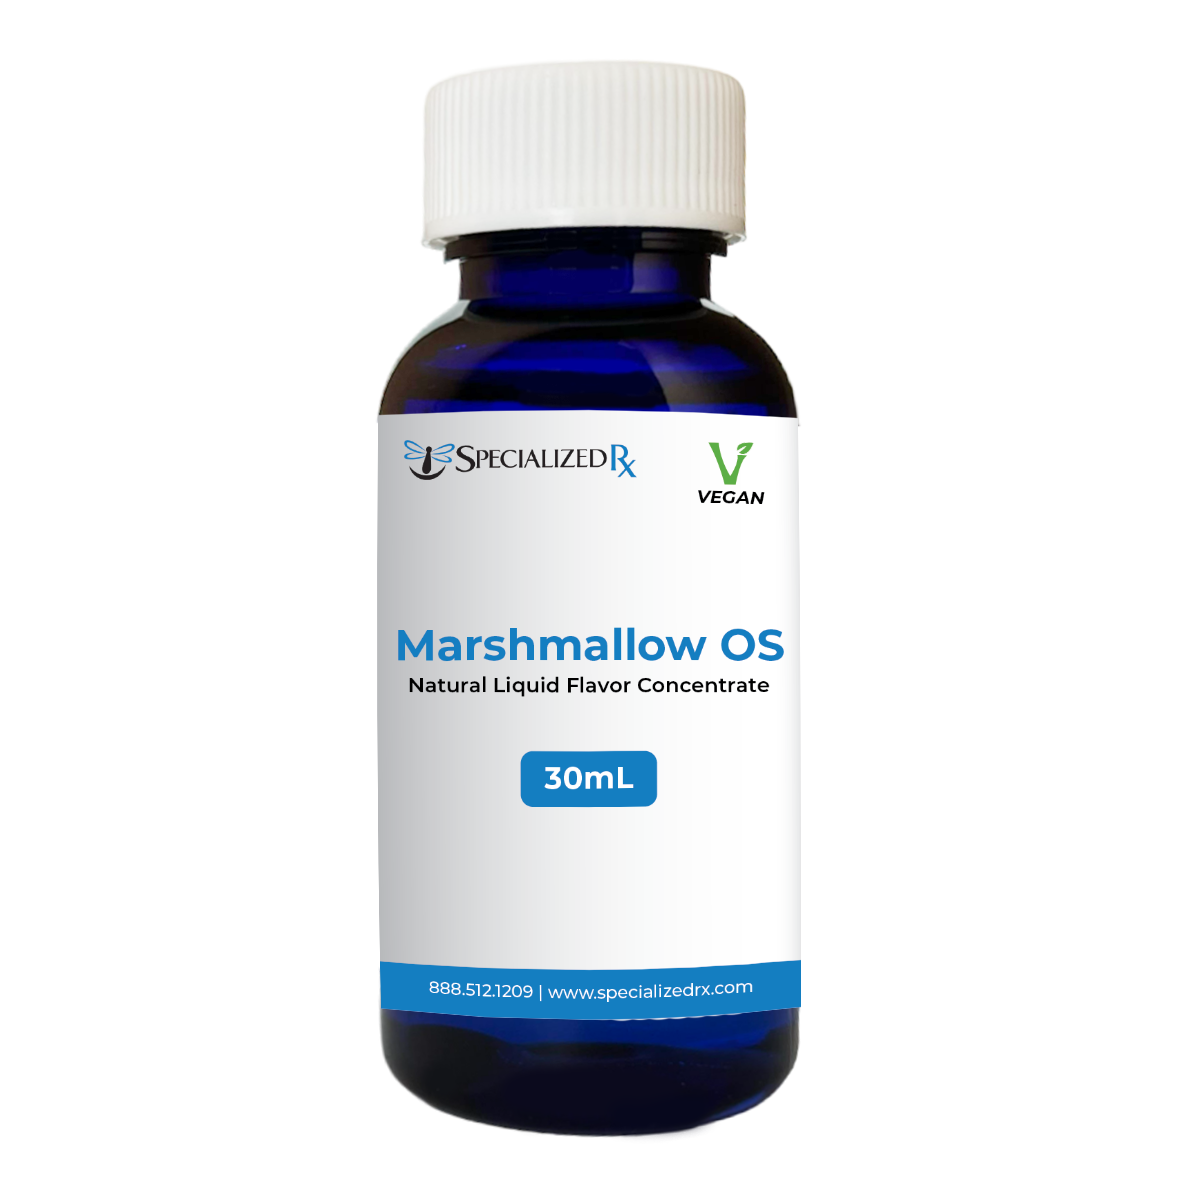 Marshmallow OS Natural Liquid Flavor Concentrate